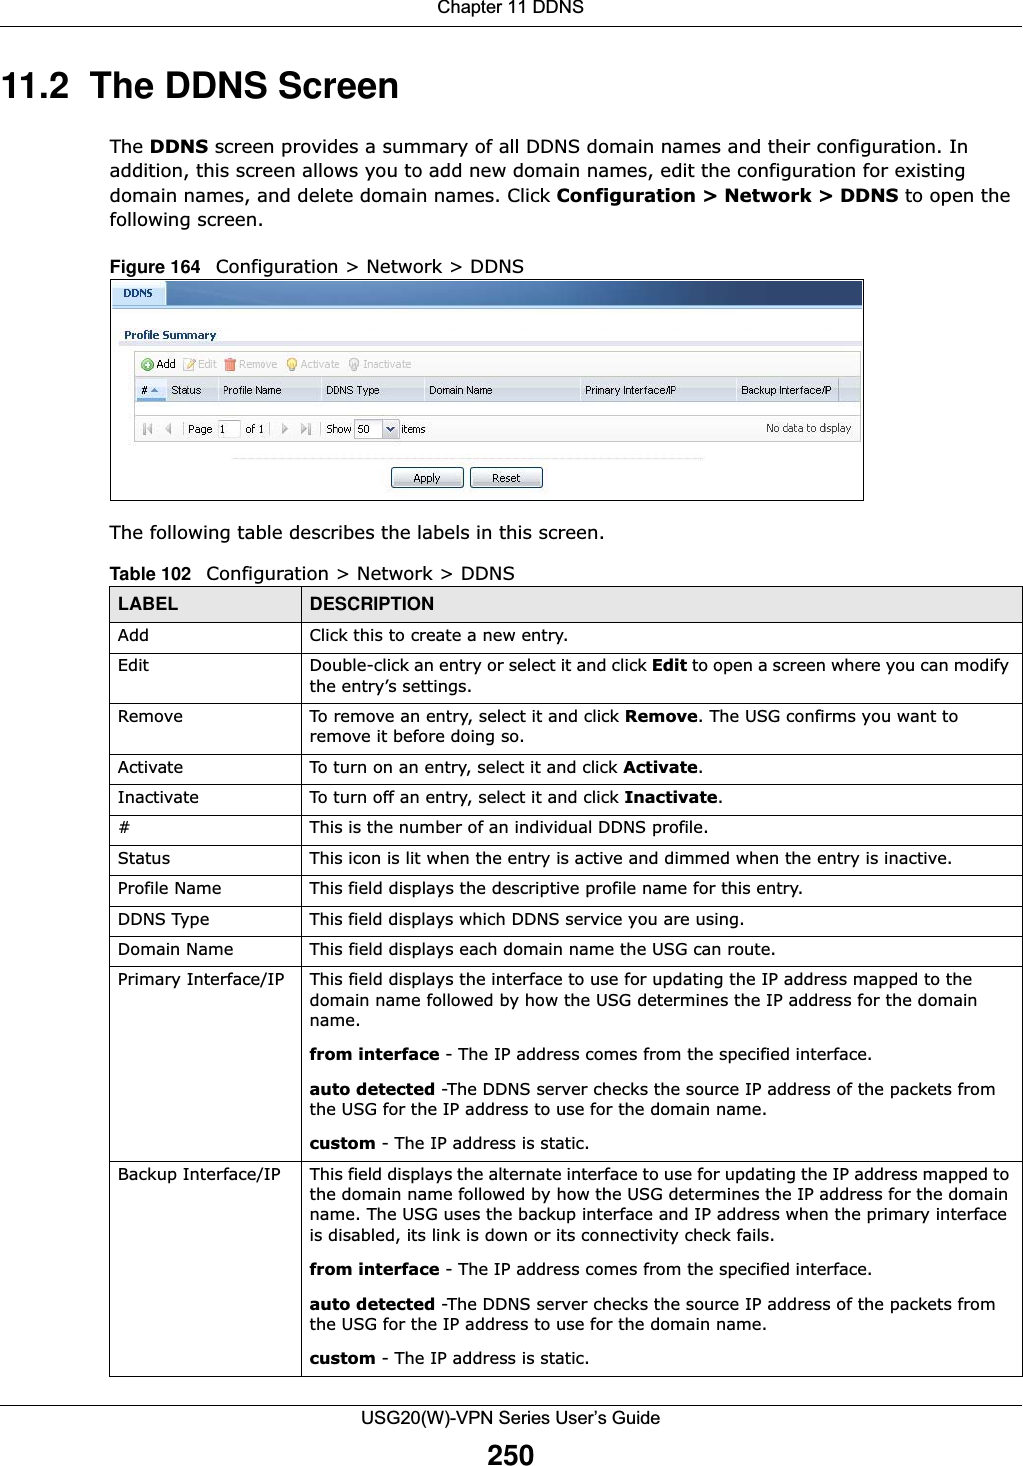 Chapter 11 DDNSUSG20(W)-VPN Series User’s Guide25011.2  The DDNS ScreenThe DDNS screen provides a summary of all DDNS domain names and their configuration. In addition, this screen allows you to add new domain names, edit the configuration for existing domain names, and delete domain names. Click Configuration &gt; Network &gt; DDNS to open the following screen.Figure 164   Configuration &gt; Network &gt; DDNS  The following table describes the labels in this screen.   Table 102   Configuration &gt; Network &gt; DDNSLABEL DESCRIPTIONAdd Click this to create a new entry.Edit Double-click an entry or select it and click Edit to open a screen where you can modify the entry’s settings. Remove To remove an entry, select it and click Remove. The USG confirms you want to remove it before doing so.Activate To turn on an entry, select it and click Activate.Inactivate To turn off an entry, select it and click Inactivate.#This is the number of an individual DDNS profile.Status This icon is lit when the entry is active and dimmed when the entry is inactive.Profile Name This field displays the descriptive profile name for this entry.DDNS Type This field displays which DDNS service you are using.Domain Name This field displays each domain name the USG can route.Primary Interface/IP This field displays the interface to use for updating the IP address mapped to the domain name followed by how the USG determines the IP address for the domain name.from interface - The IP address comes from the specified interface.auto detected -The DDNS server checks the source IP address of the packets from the USG for the IP address to use for the domain name.custom - The IP address is static.Backup Interface/IP This field displays the alternate interface to use for updating the IP address mapped to the domain name followed by how the USG determines the IP address for the domain name. The USG uses the backup interface and IP address when the primary interface is disabled, its link is down or its connectivity check fails.from interface - The IP address comes from the specified interface.auto detected -The DDNS server checks the source IP address of the packets from the USG for the IP address to use for the domain name.custom - The IP address is static.